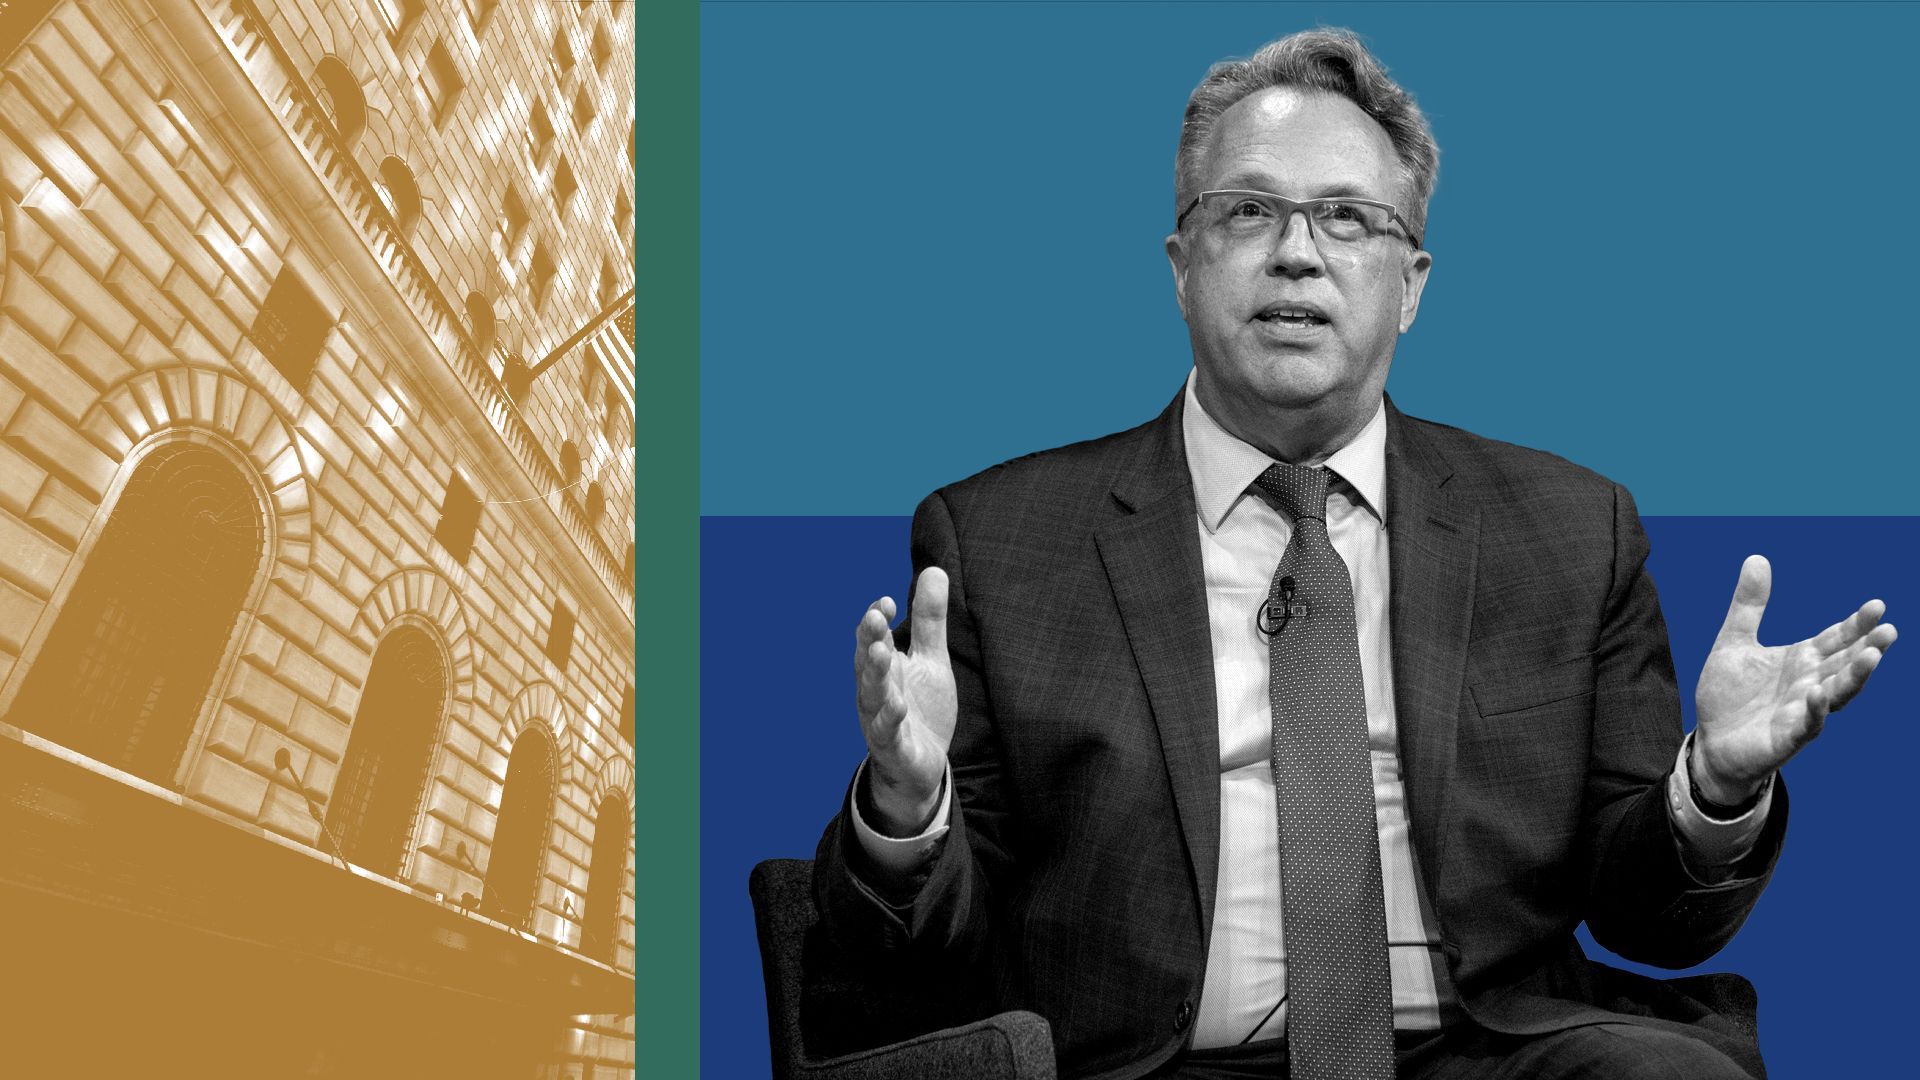 Photo illustration of John Williams, the New York Federal Reserve Bank and abstract shapes.